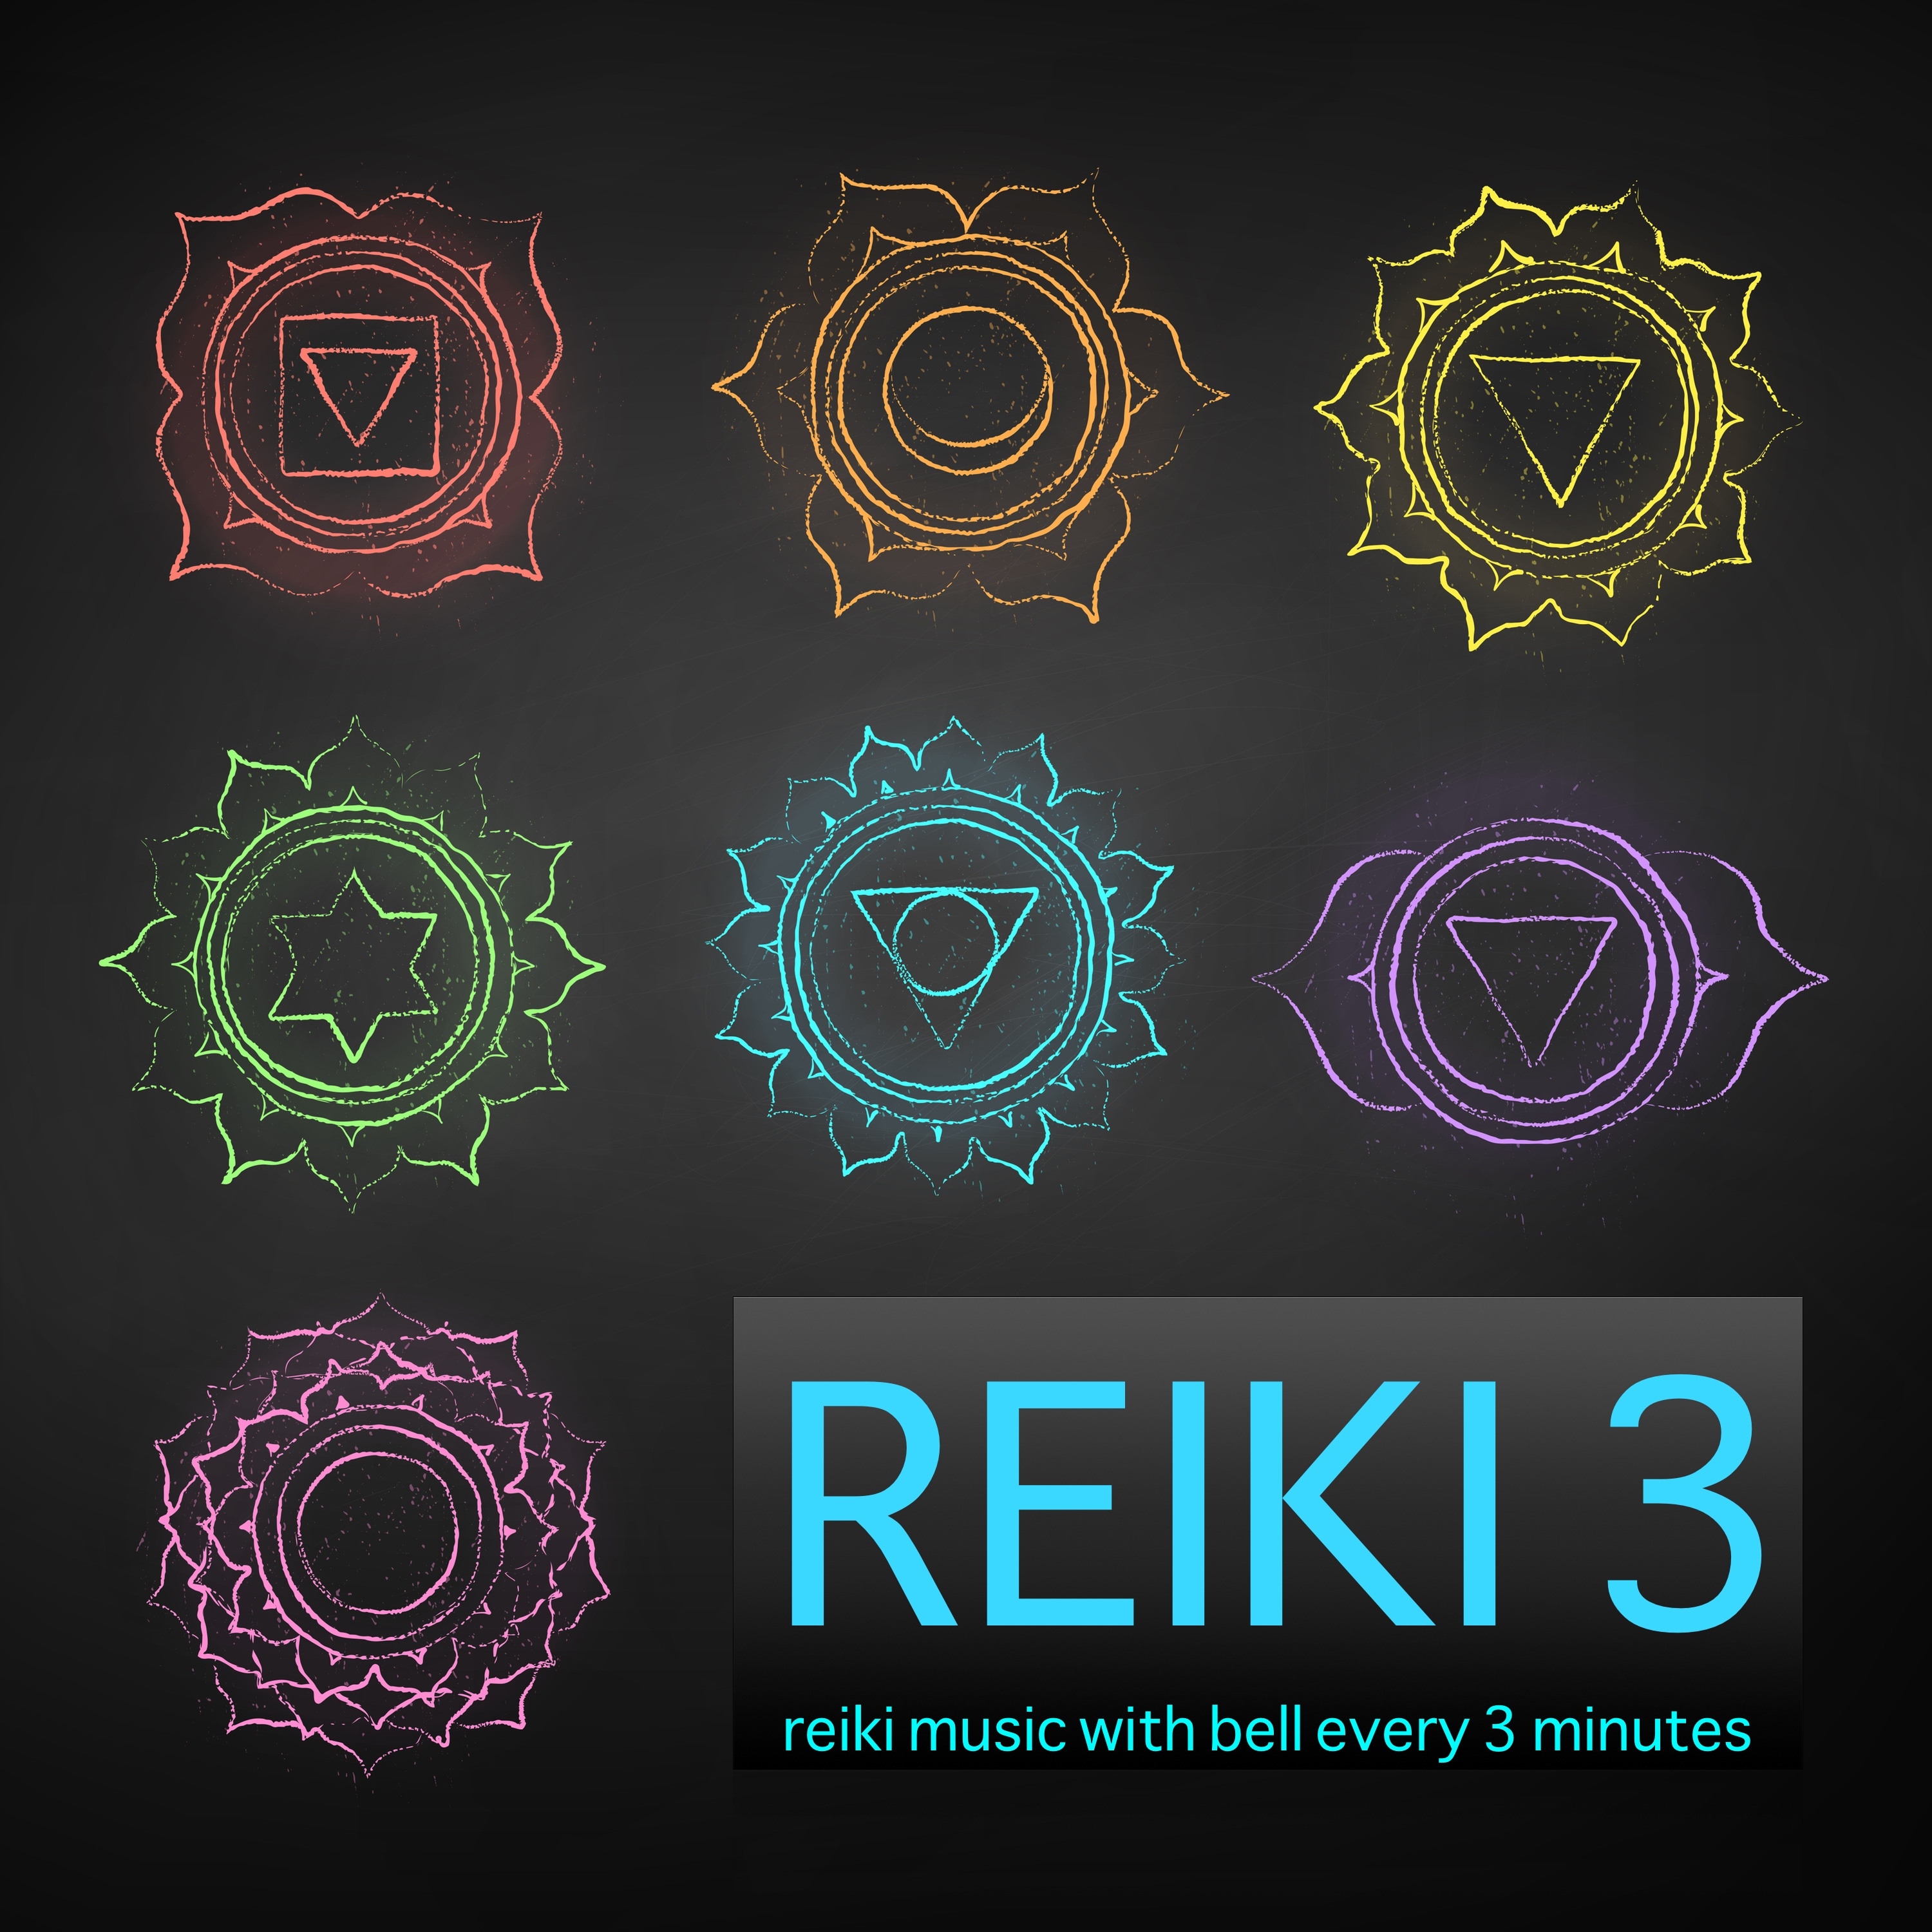 Reiki Level 2 - Meditation Music for Reiki with Bell Every 3 Minutes